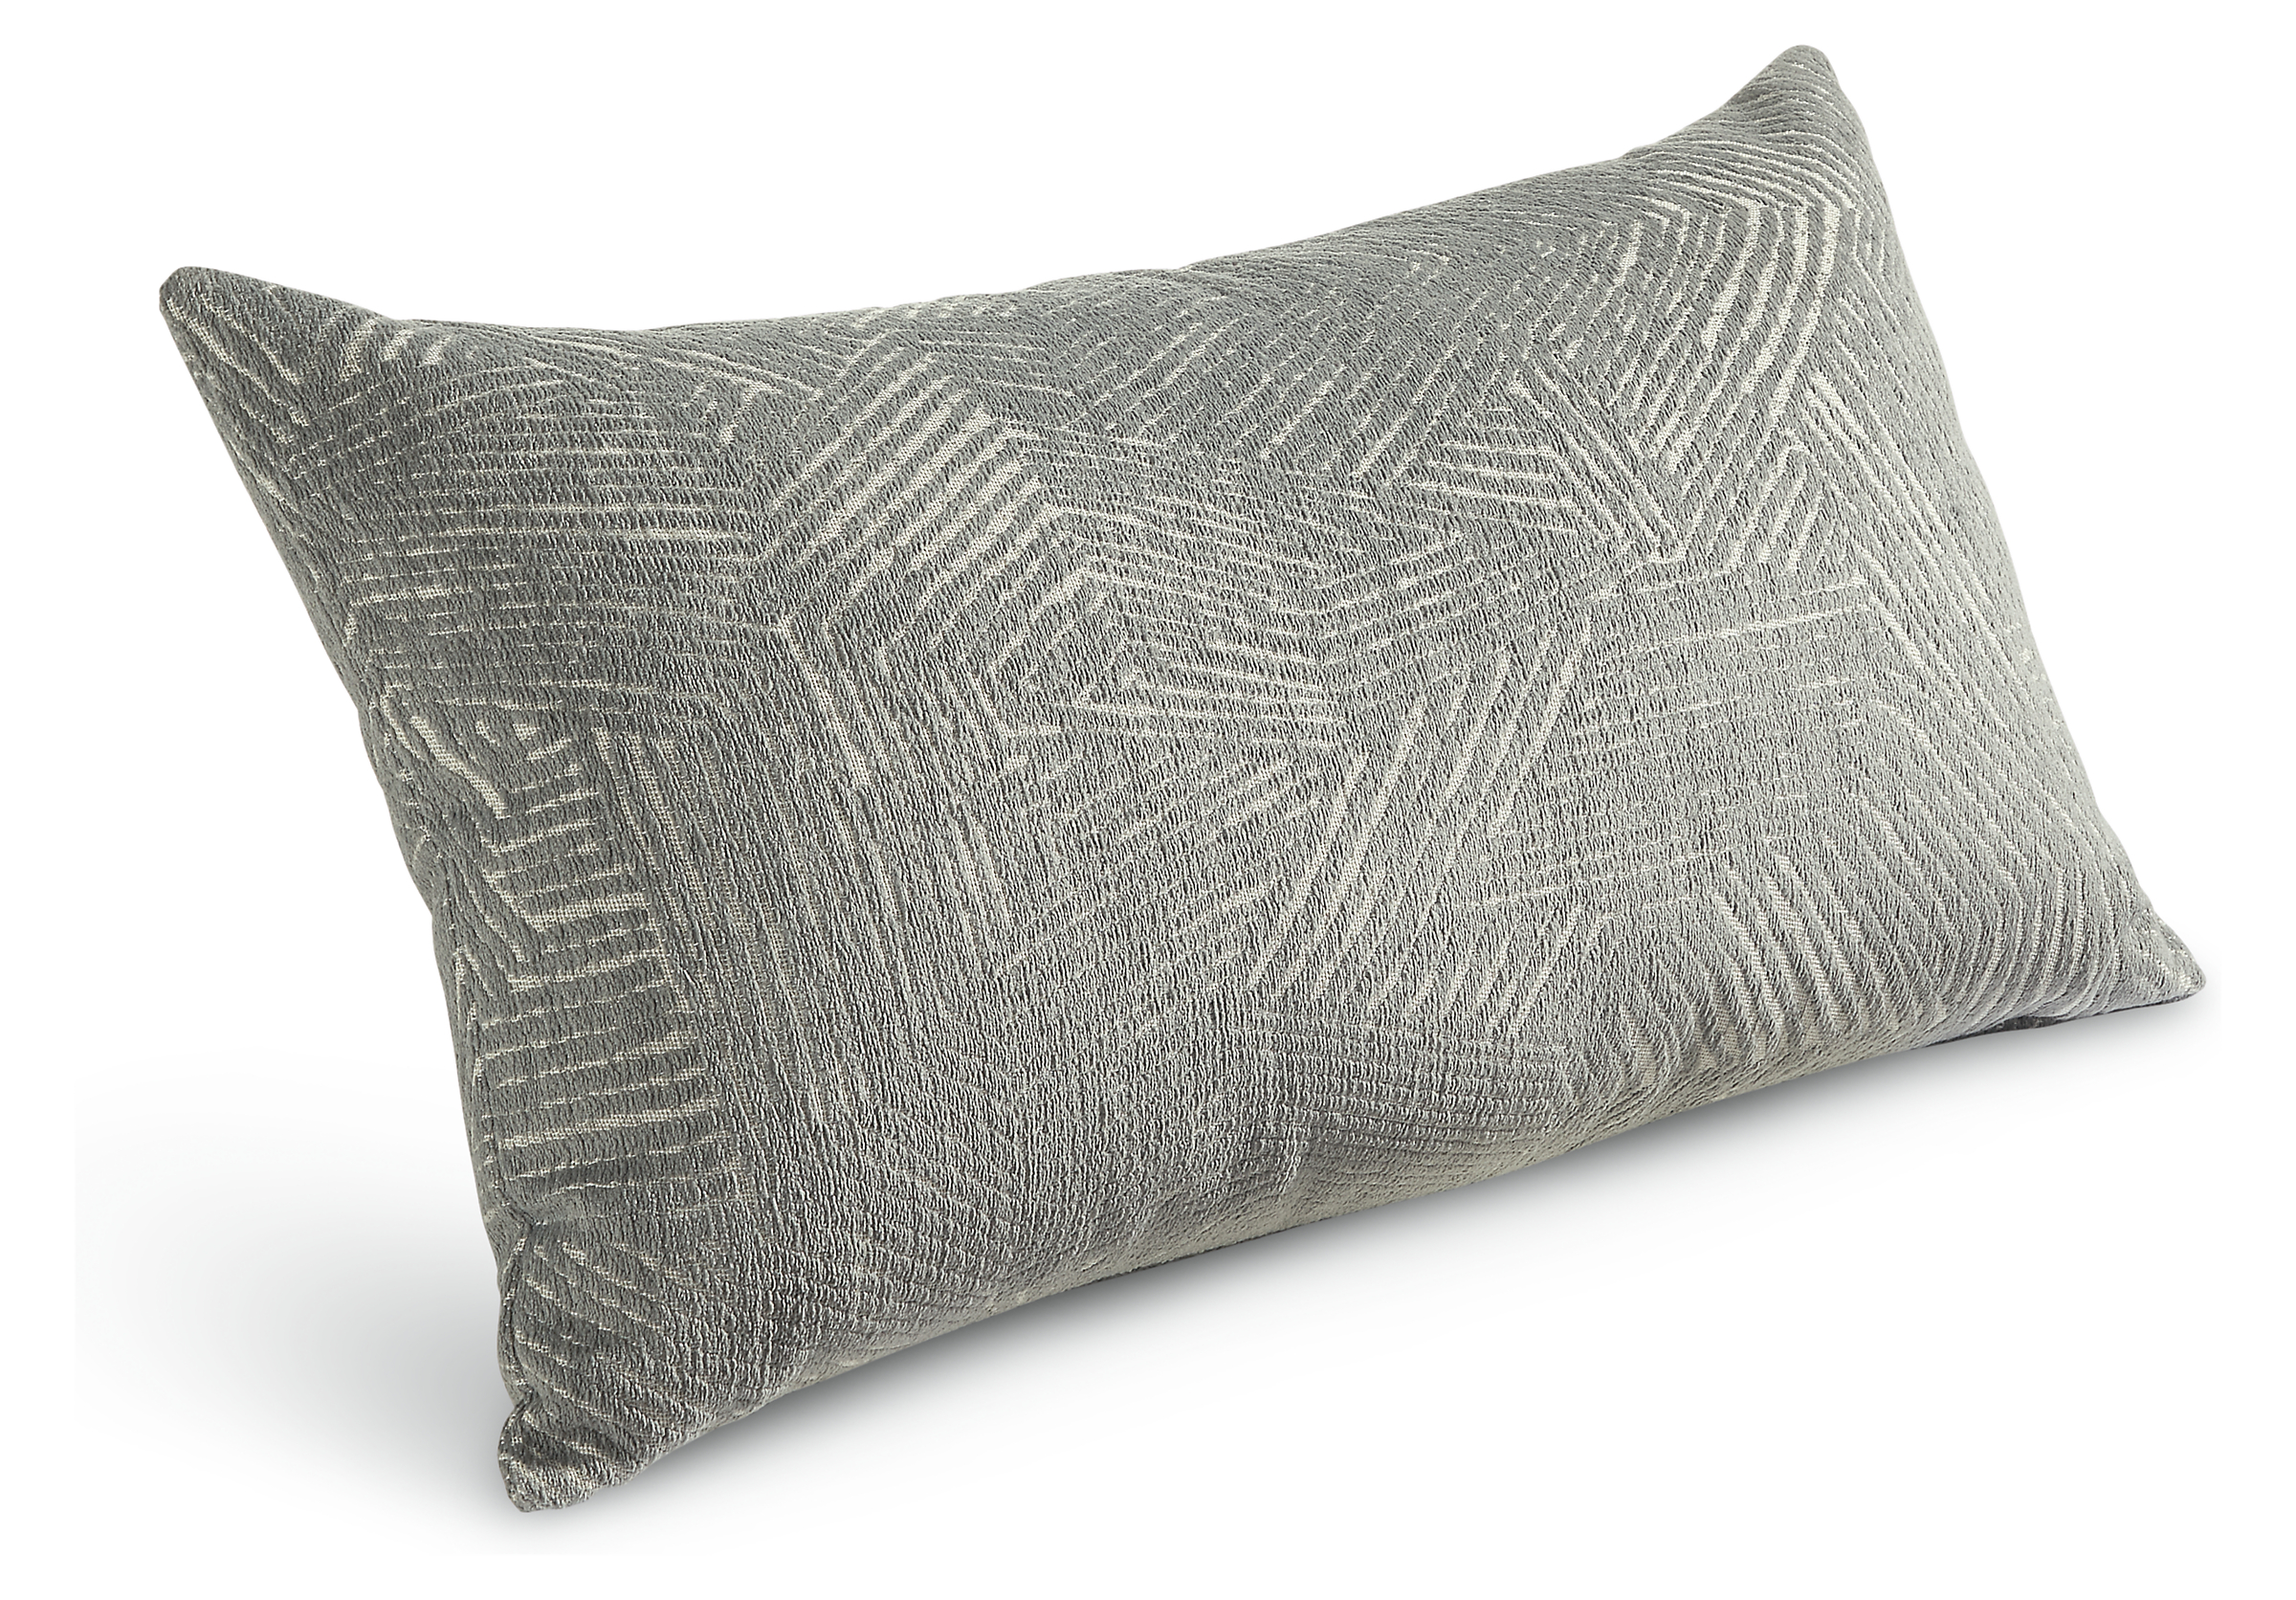 Ezra 22w 13h Outdoor Pillow in Charcoal